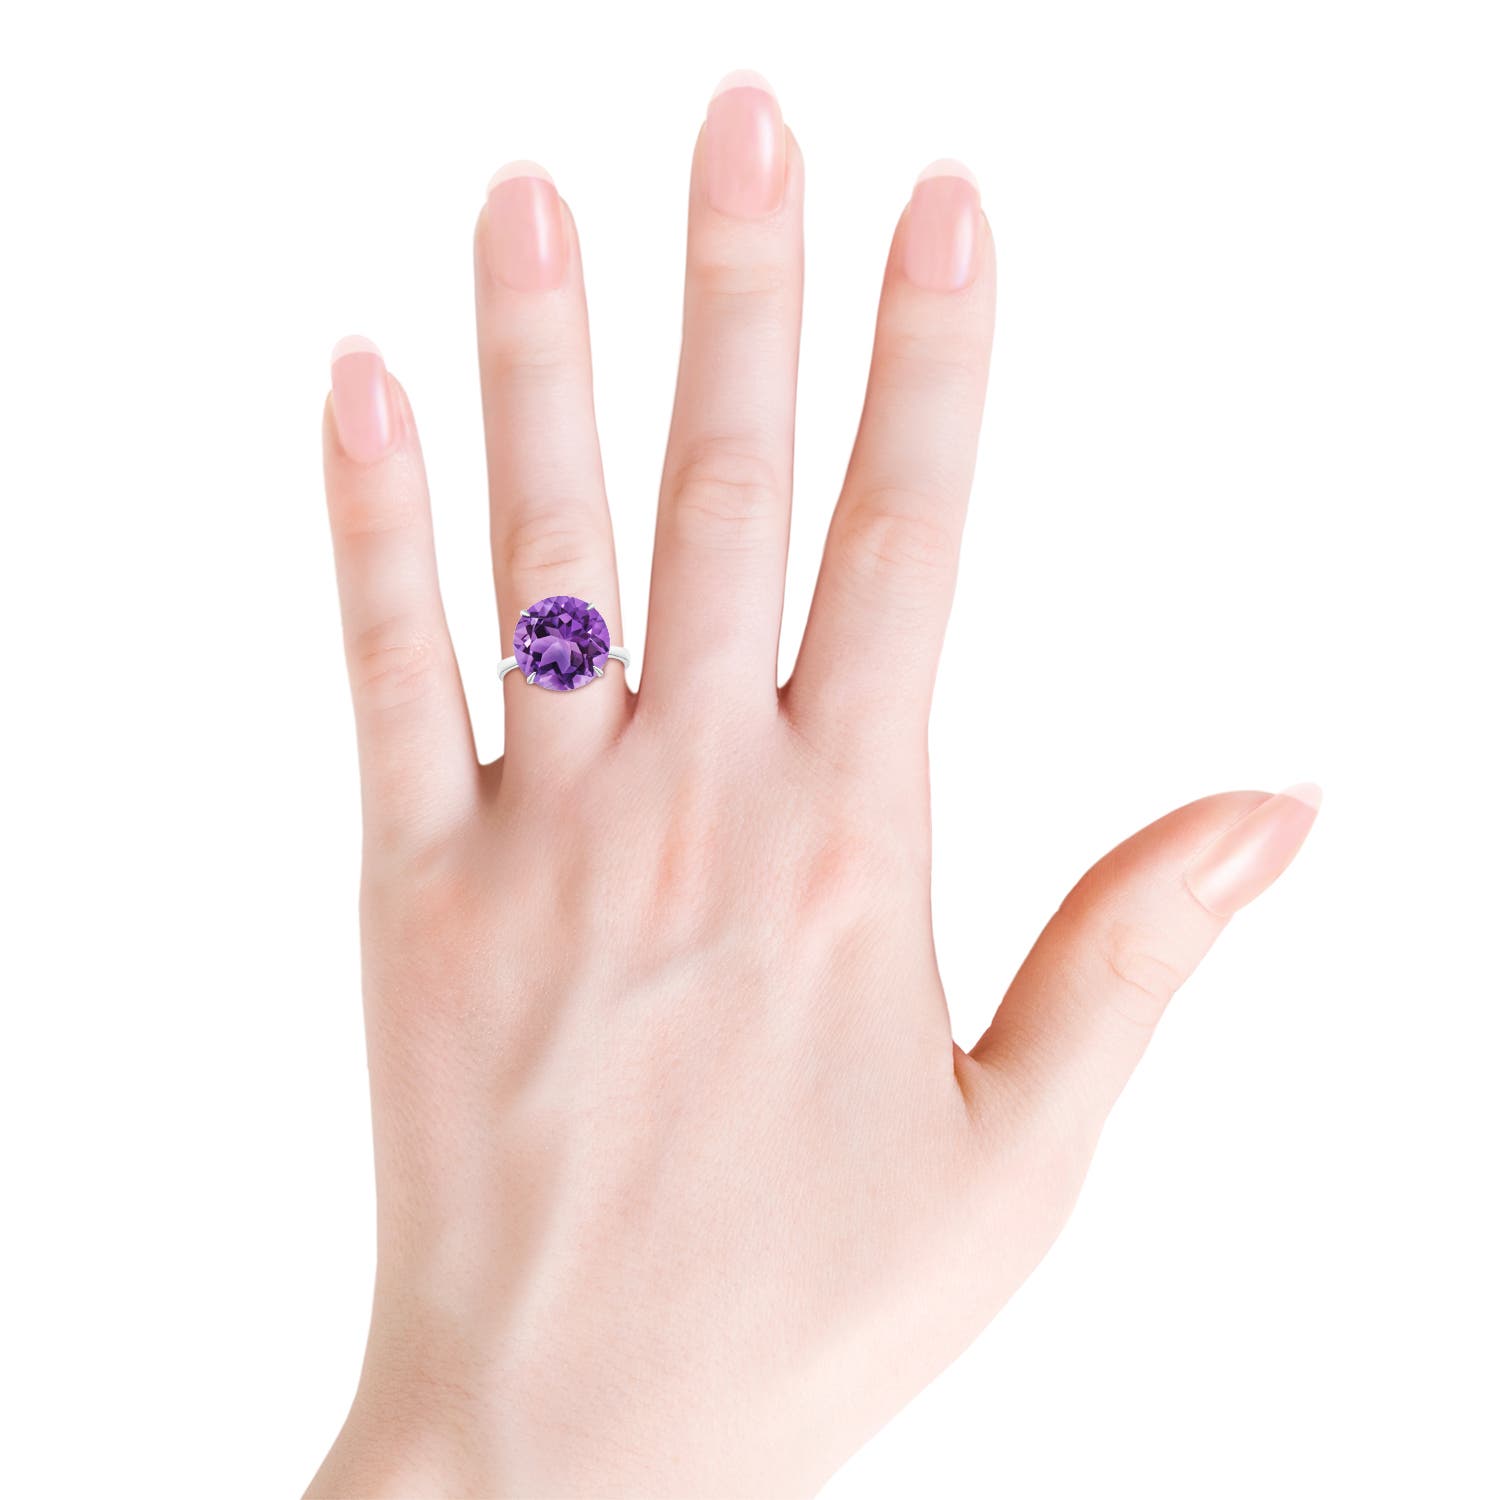 AA- Amethyst / 7.2 CT / 14 KT White Gold